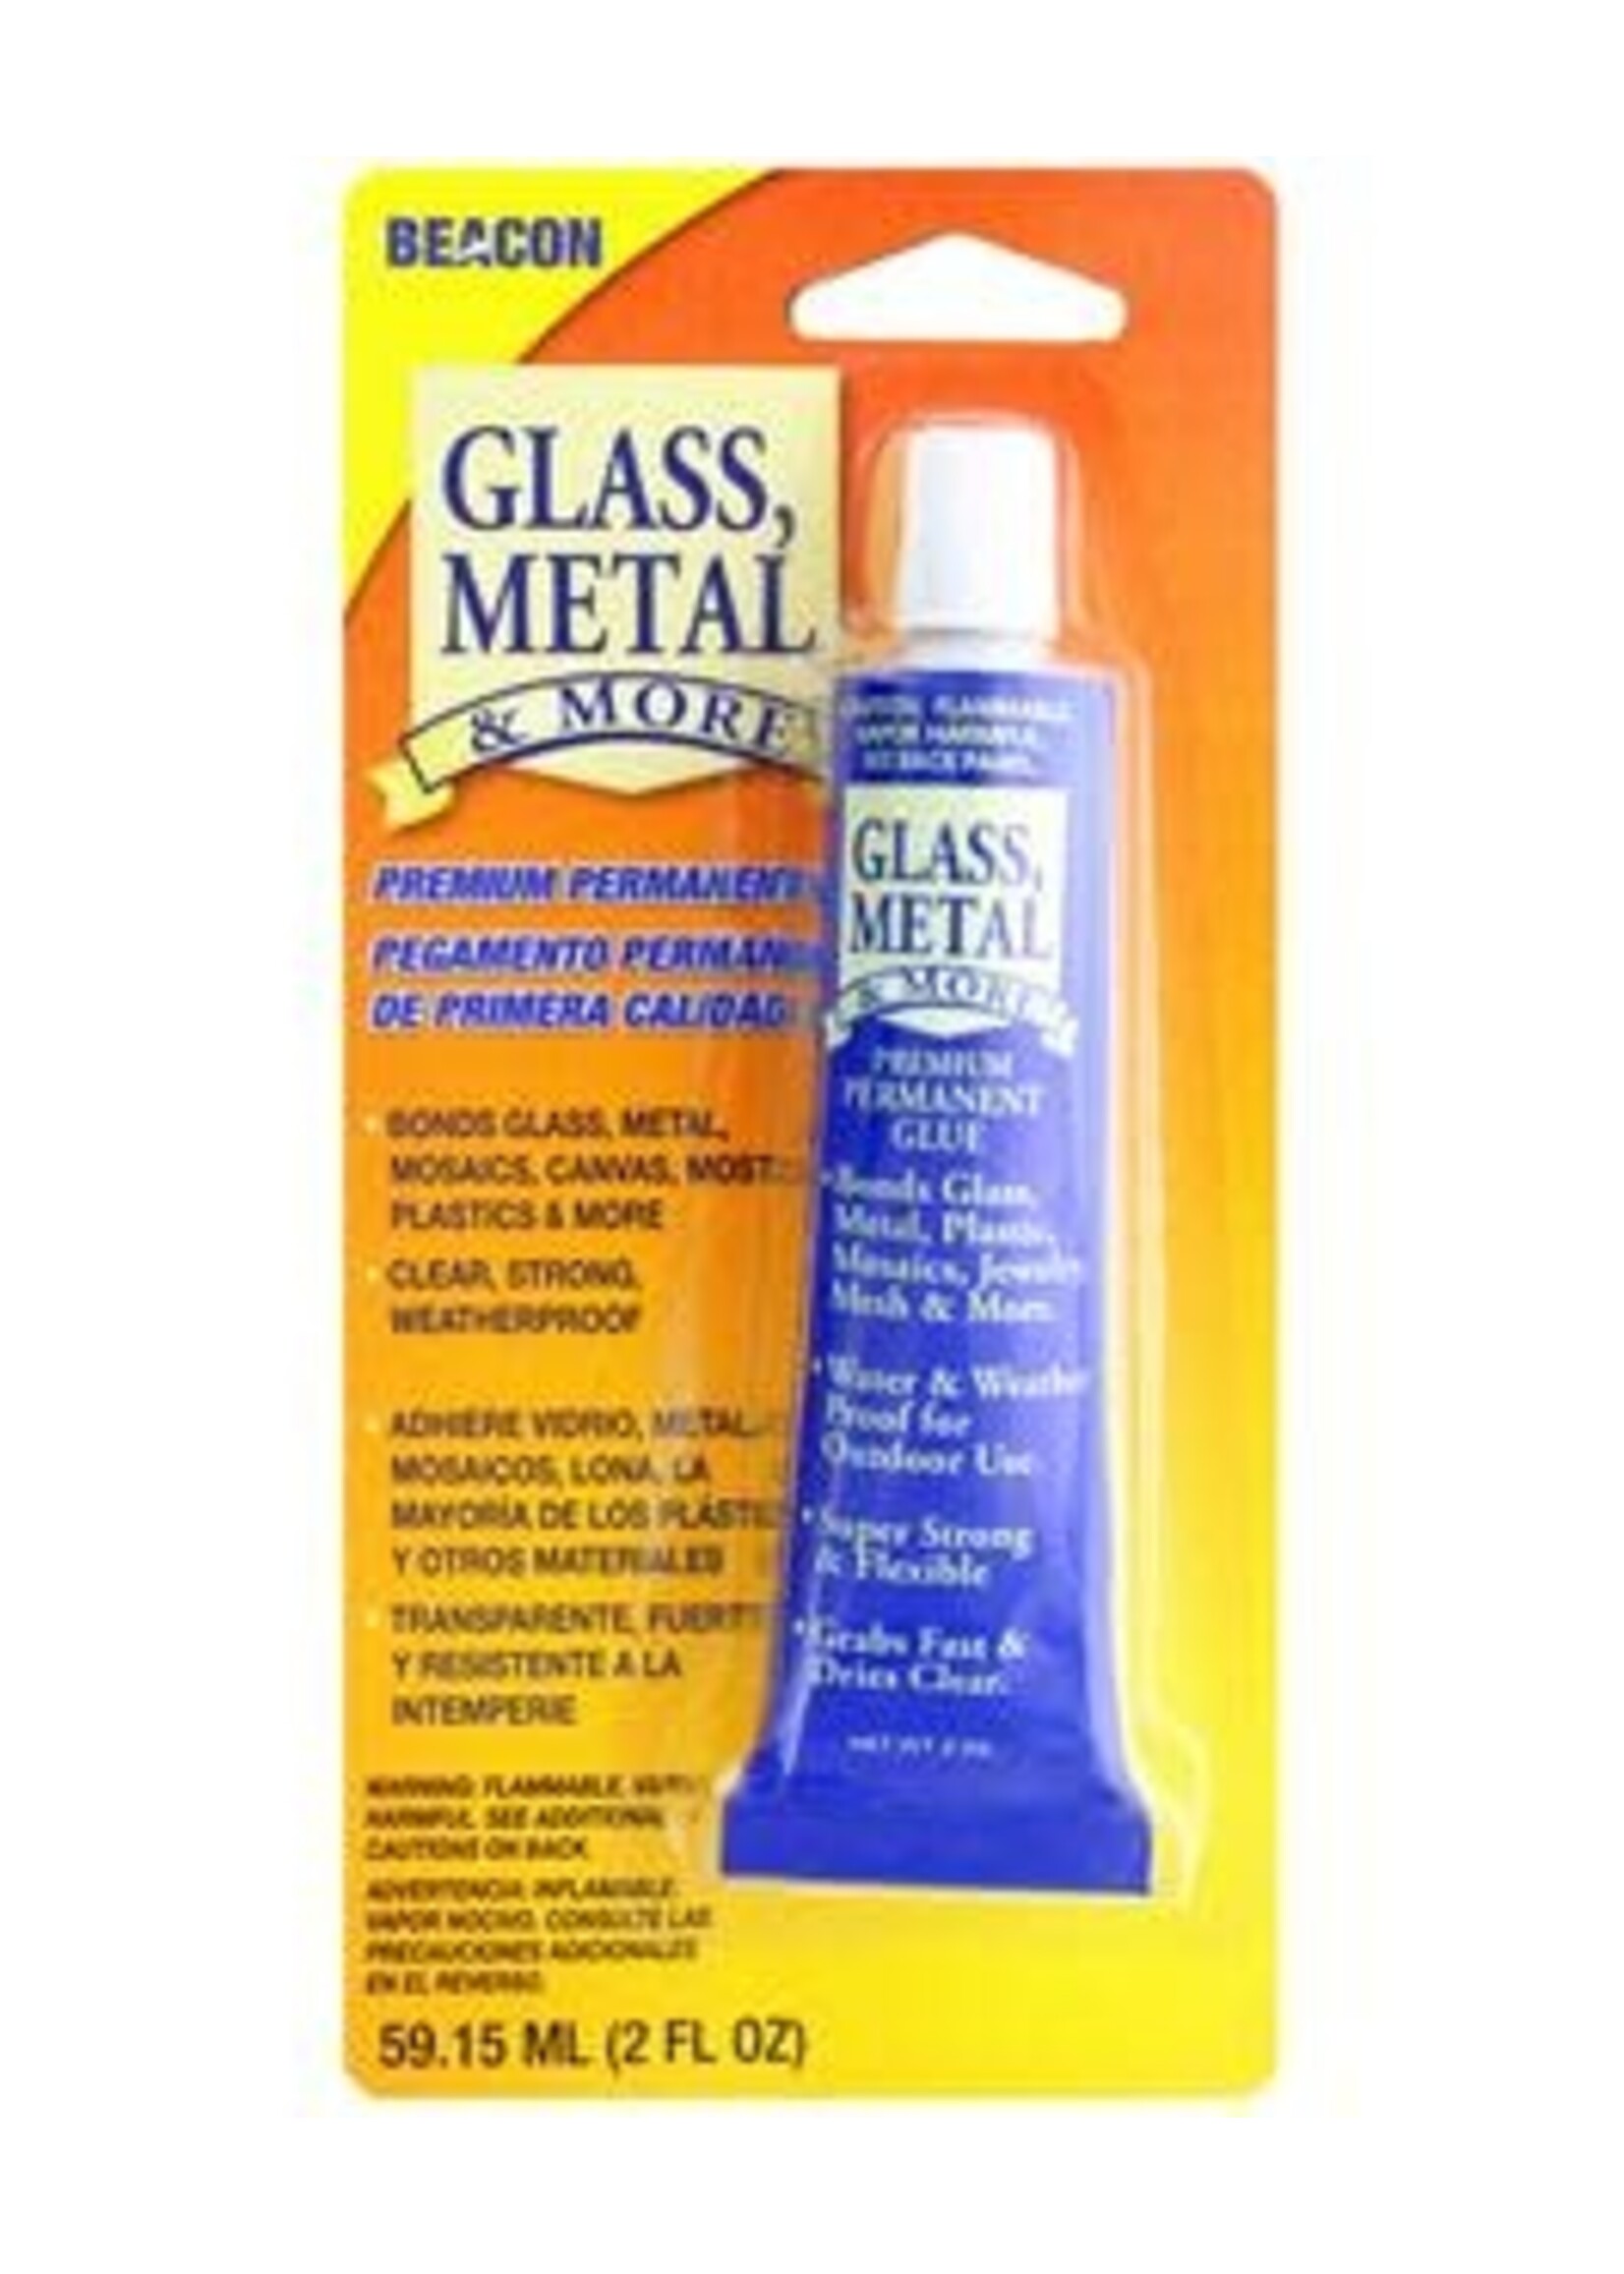 Beacon Glue Glass, Metal & More 2oz Carded